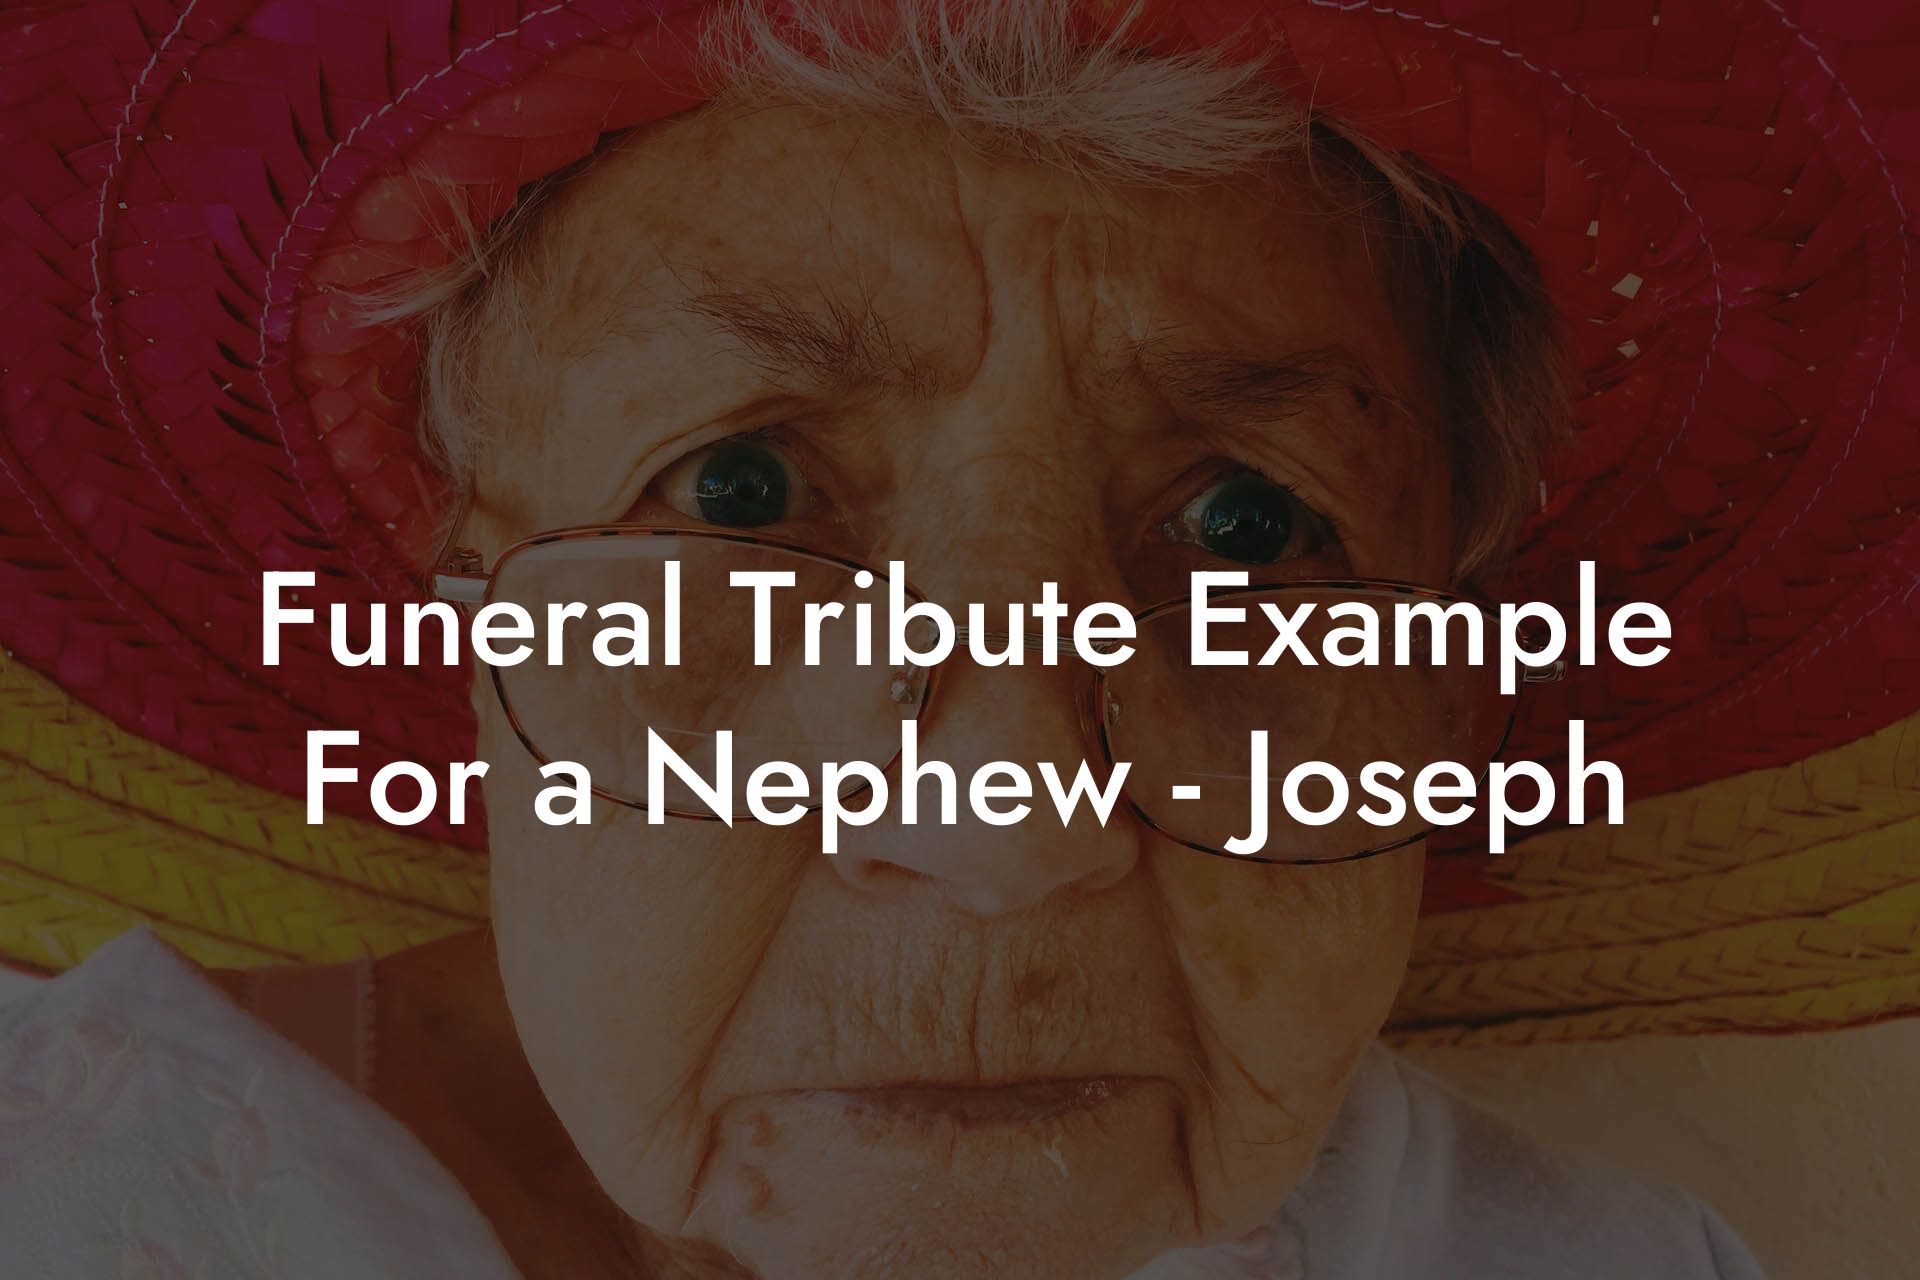 Funeral Tribute Example For a Nephew - Joseph